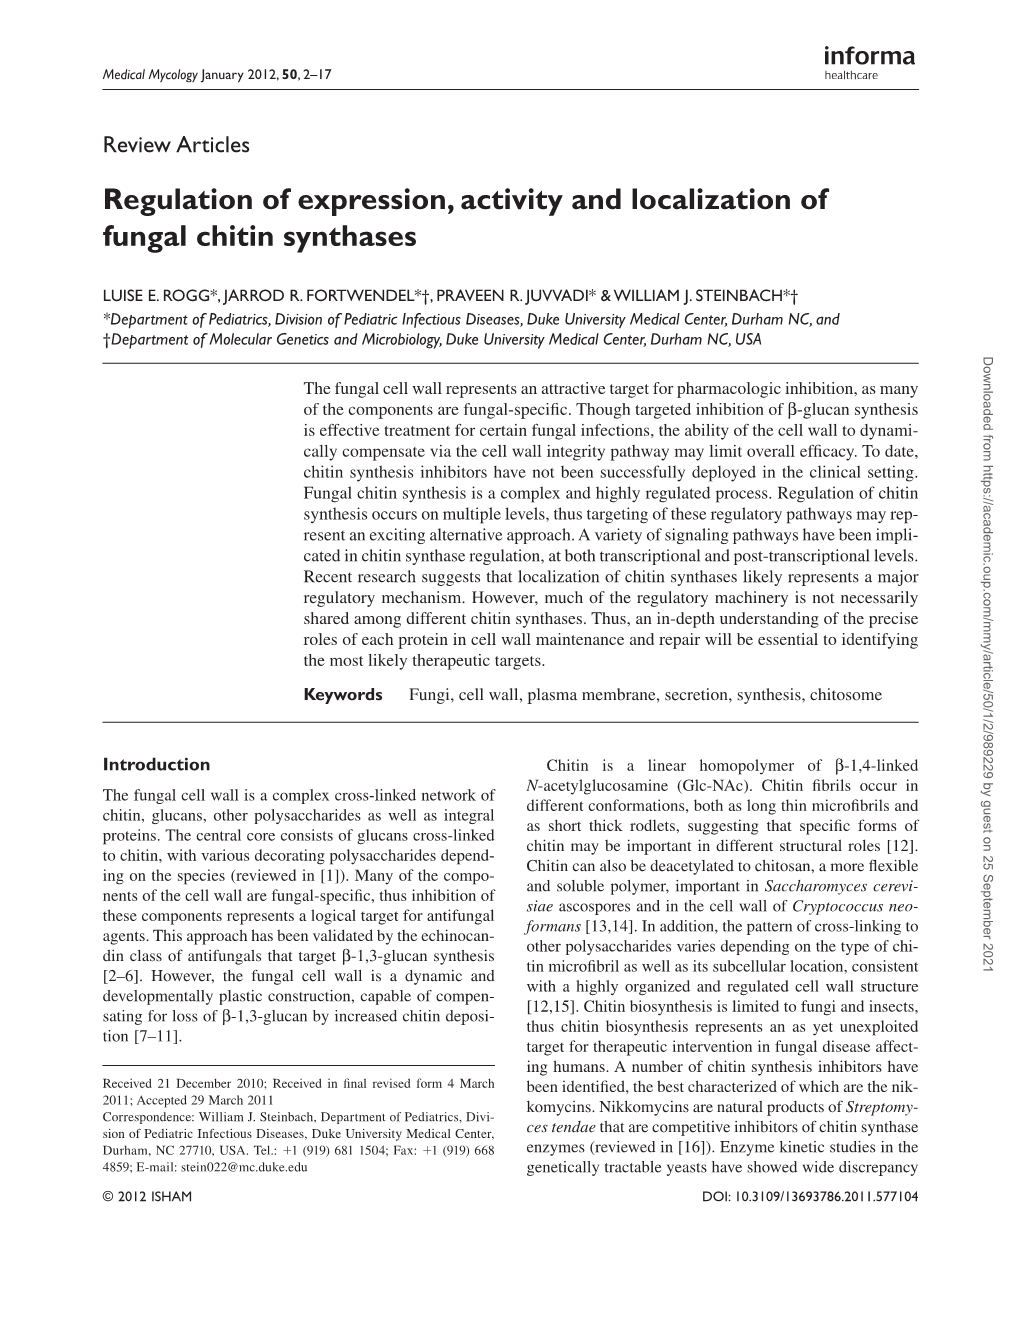 Regulation of Expression, Activity and Localization of Fungal Chitin Synthases